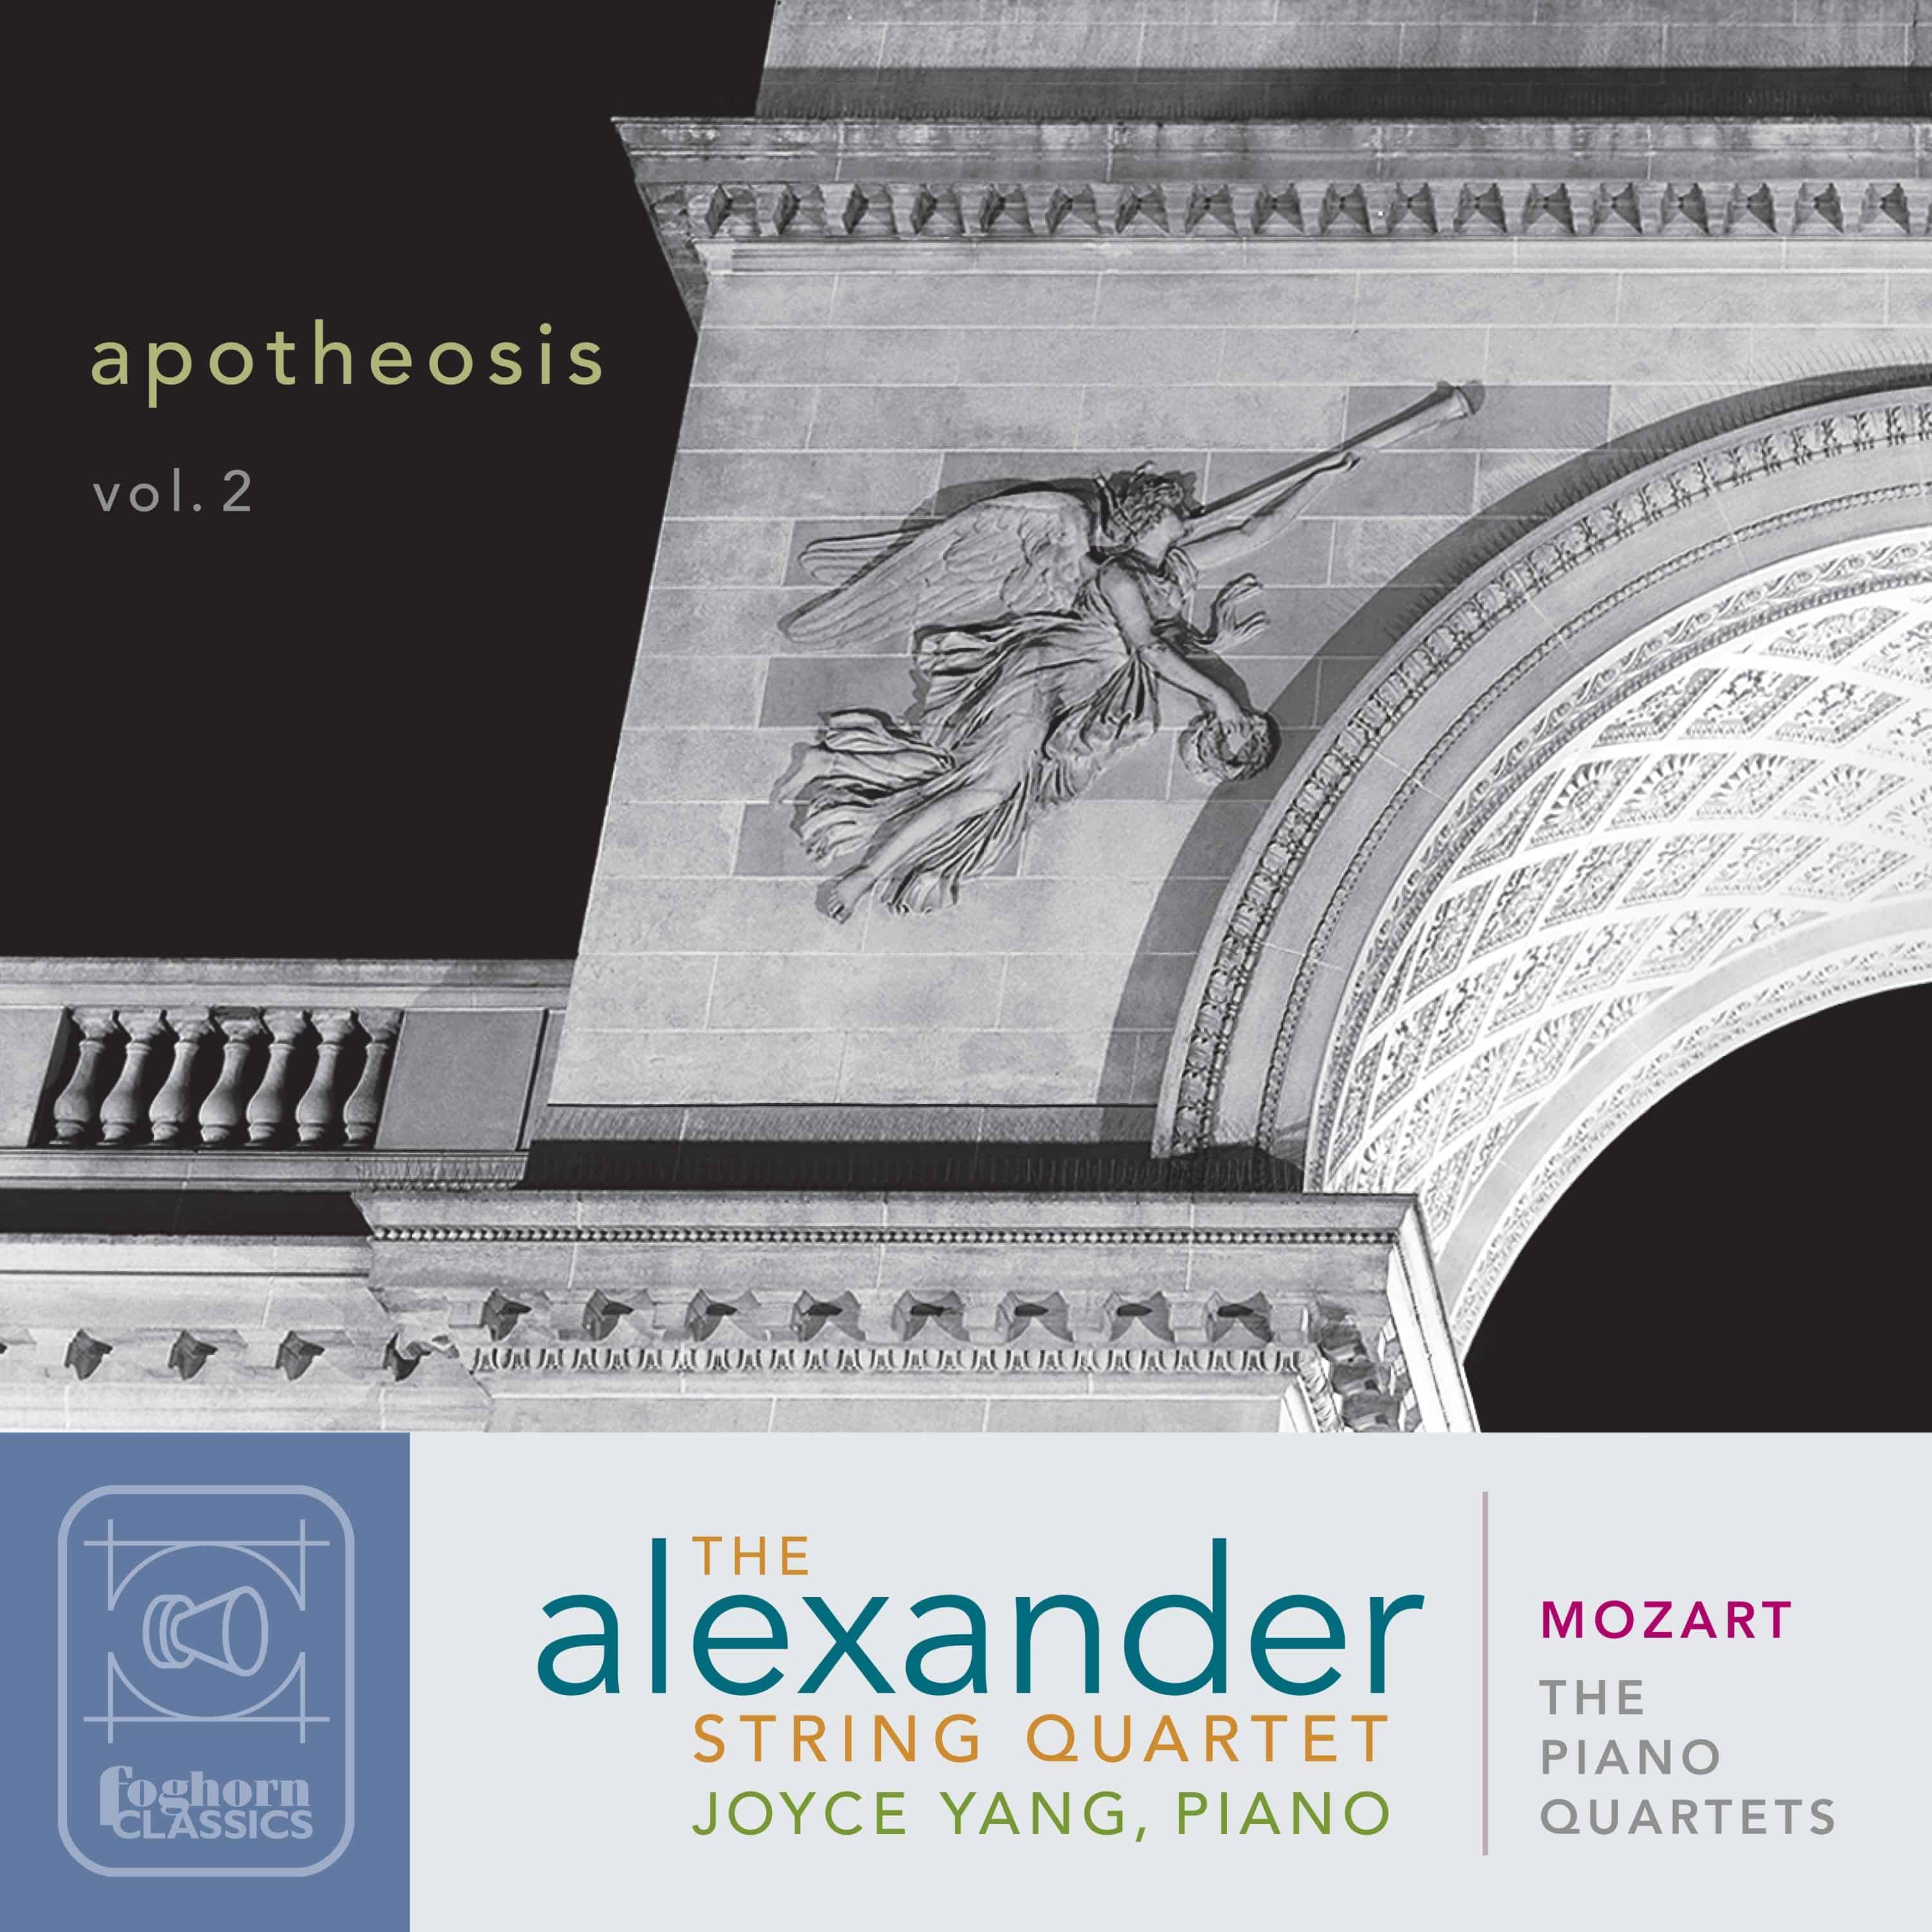 Apotheosis Volume Two Should Be Your First Choice in Mozart’s Piano Quartets